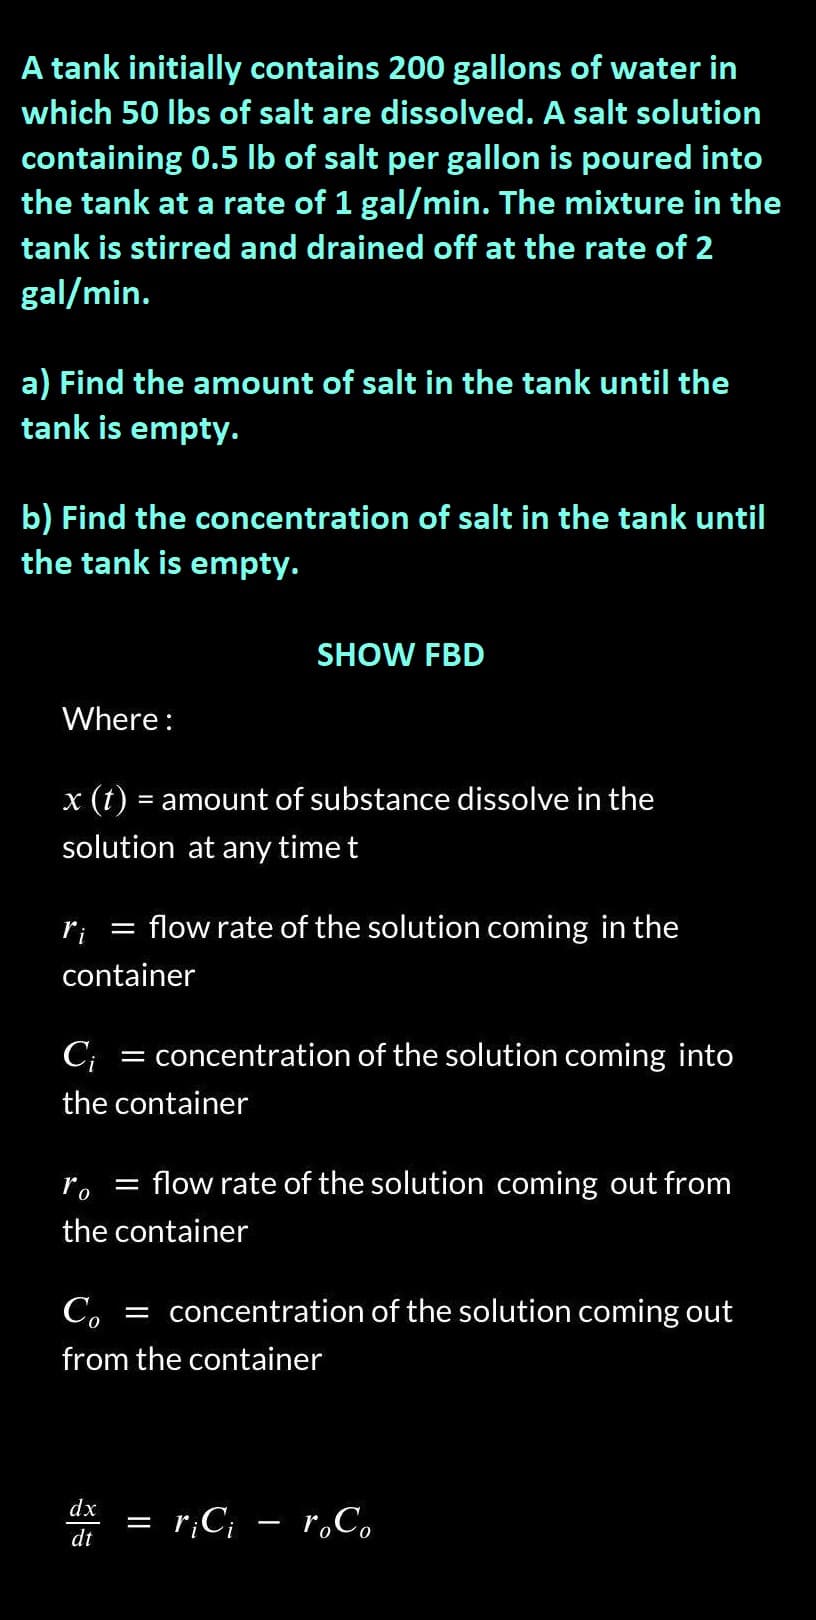 A tank initially contains 200 gallons of water in
which 50 lbs of salt are dissolved. A salt solution
containing 0.5 lb of salt per gallon is poured into
the tank at a rate of 1 gal/min. The mixture in the
tank is stirred and drained off at the rate of 2
gal/min.
a) Find the amount of salt in the tank until the
tank is empty.
b) Find the concentration of salt in the tank until
the tank is empty.
Where:
x (t) = amount of substance dissolve in the
solution at any time t
ri
=
container
SHOW FBD
flow rate of the solution coming in the
C₁ = concentration of the solution coming into
the container
dx
dt
ro =
flow rate of the solution coming out from
the container
Co
= concentration of the solution coming out
from the container
||
r¡Ci - roCo